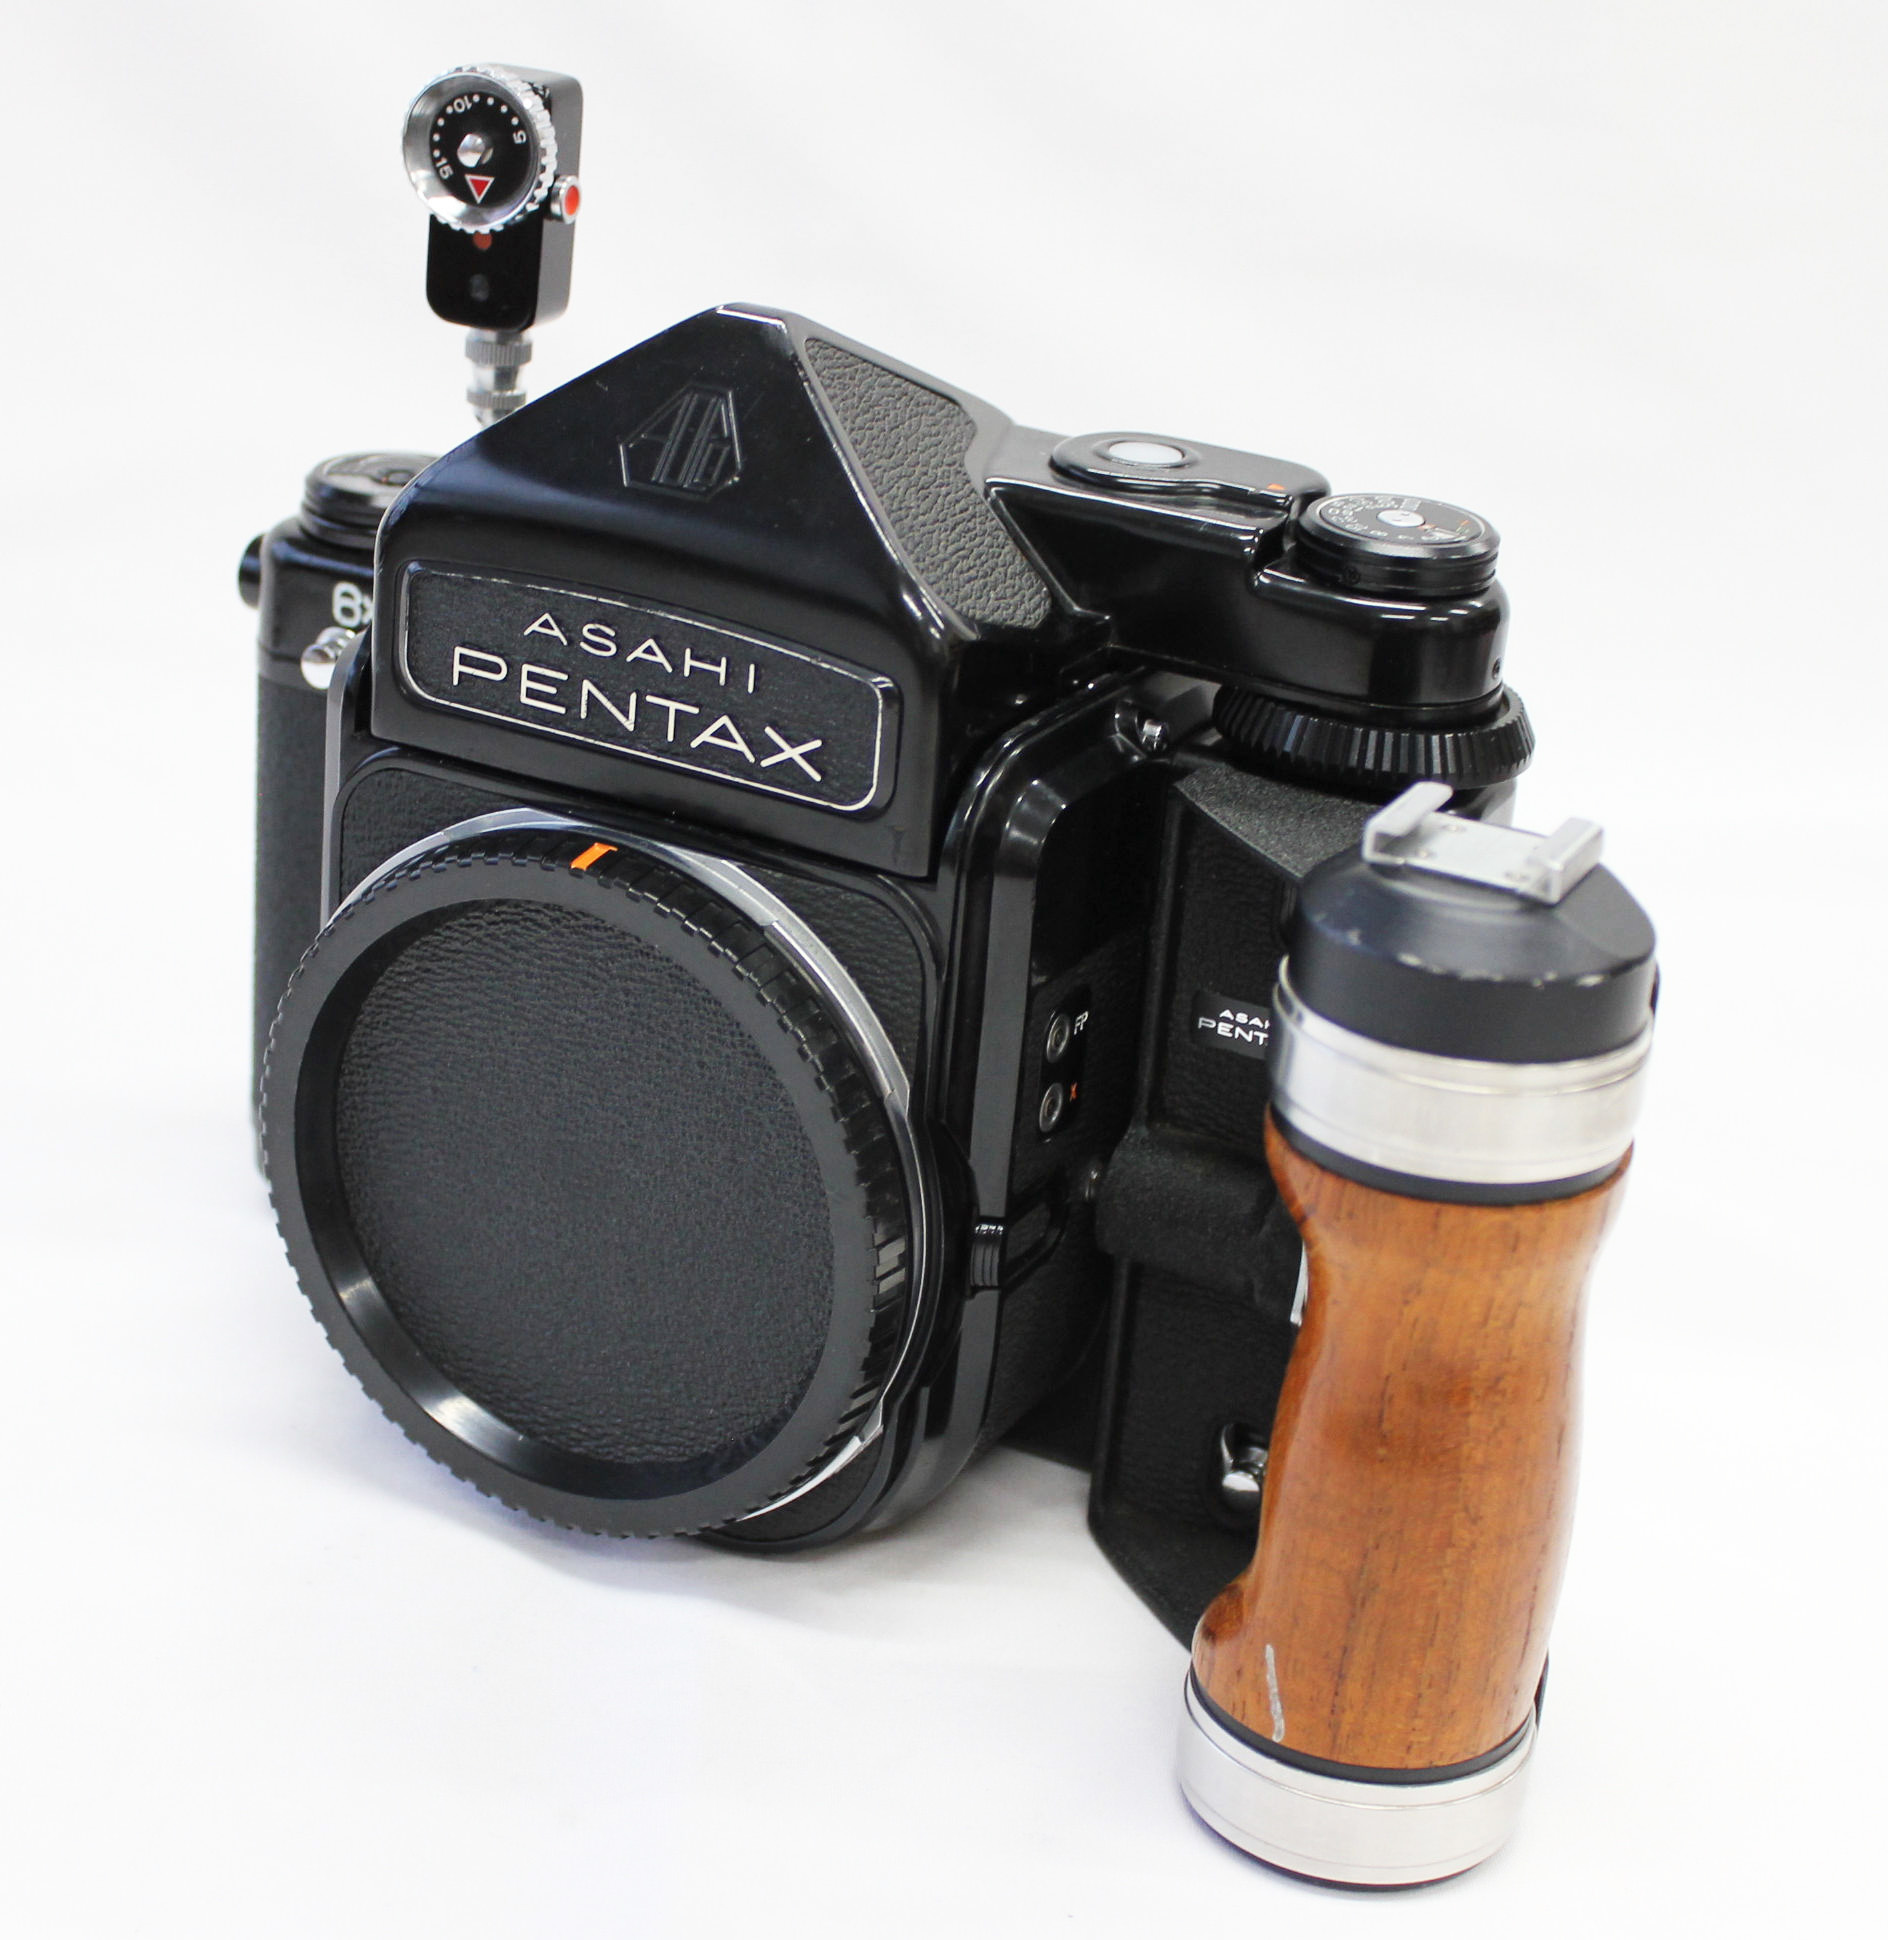  Pentax 6x7 TTL Mirror Up Camera with Wood Grip and Self Timer from Japan Photo 1